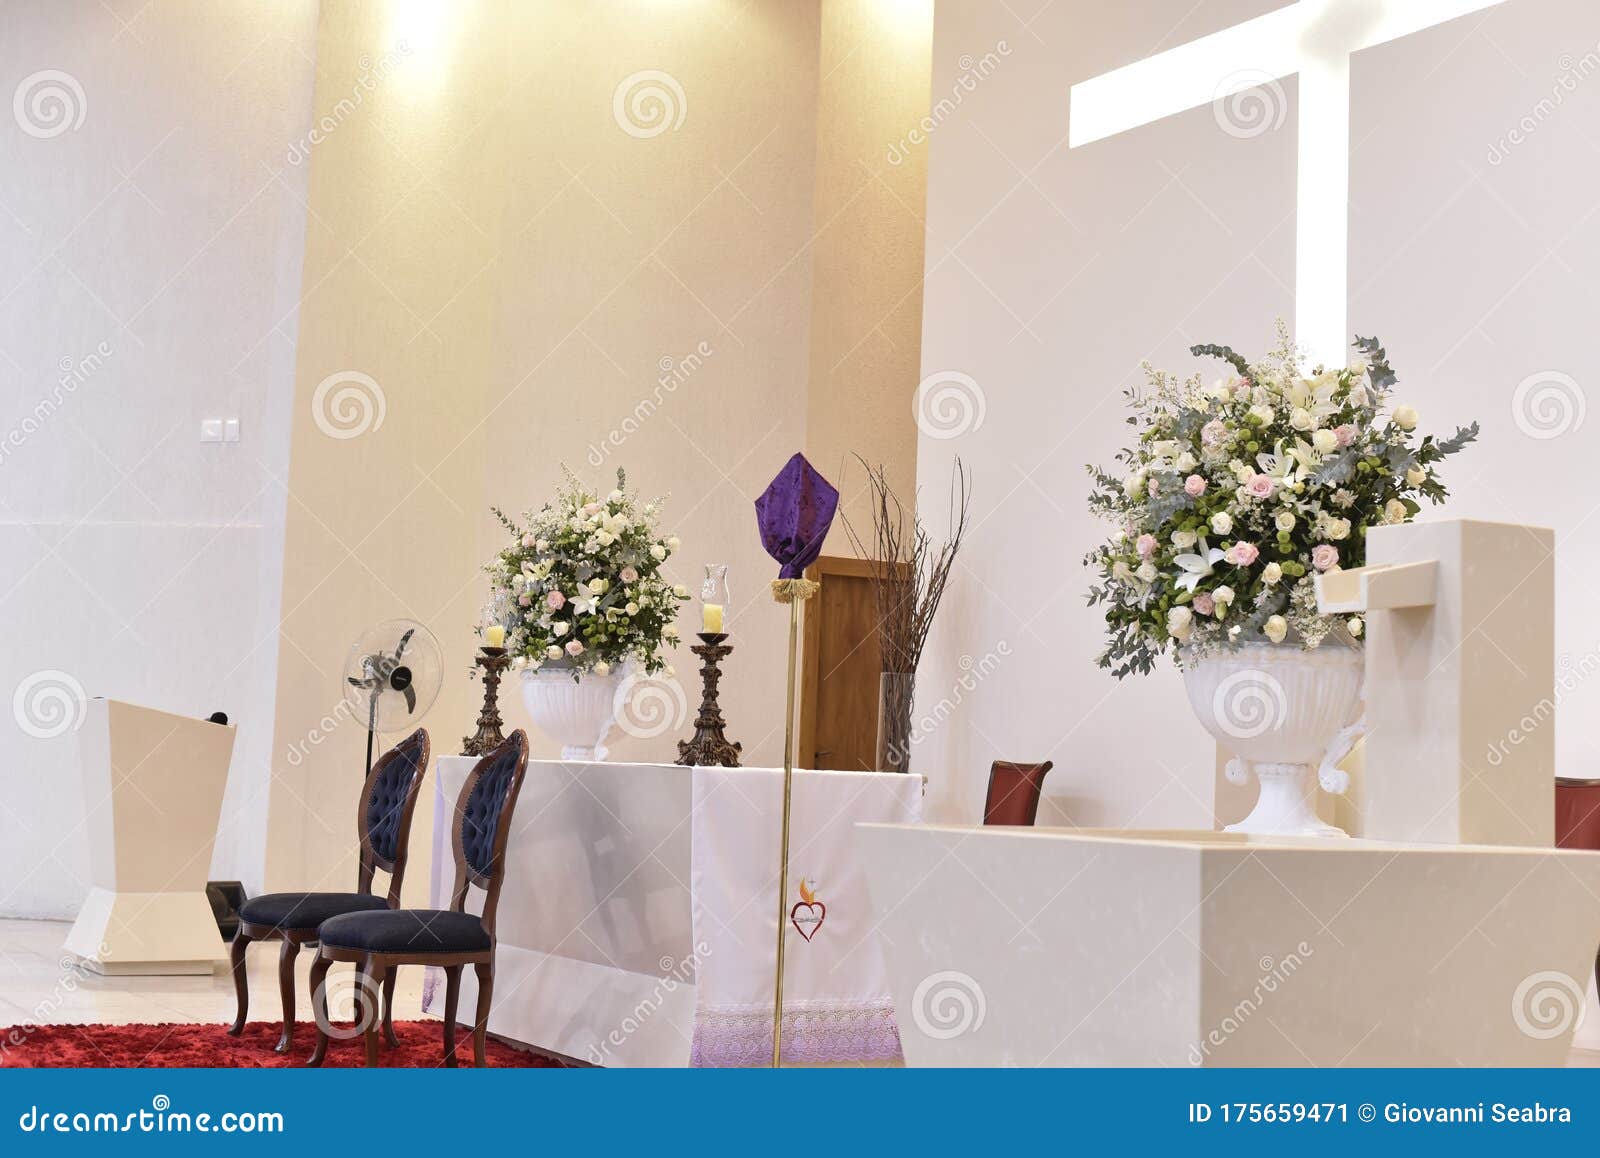 Catholic Church Prayer Altar with Flower Arrangements and Cross in the  Background Stock Image - Image of celebration, green: 175659471